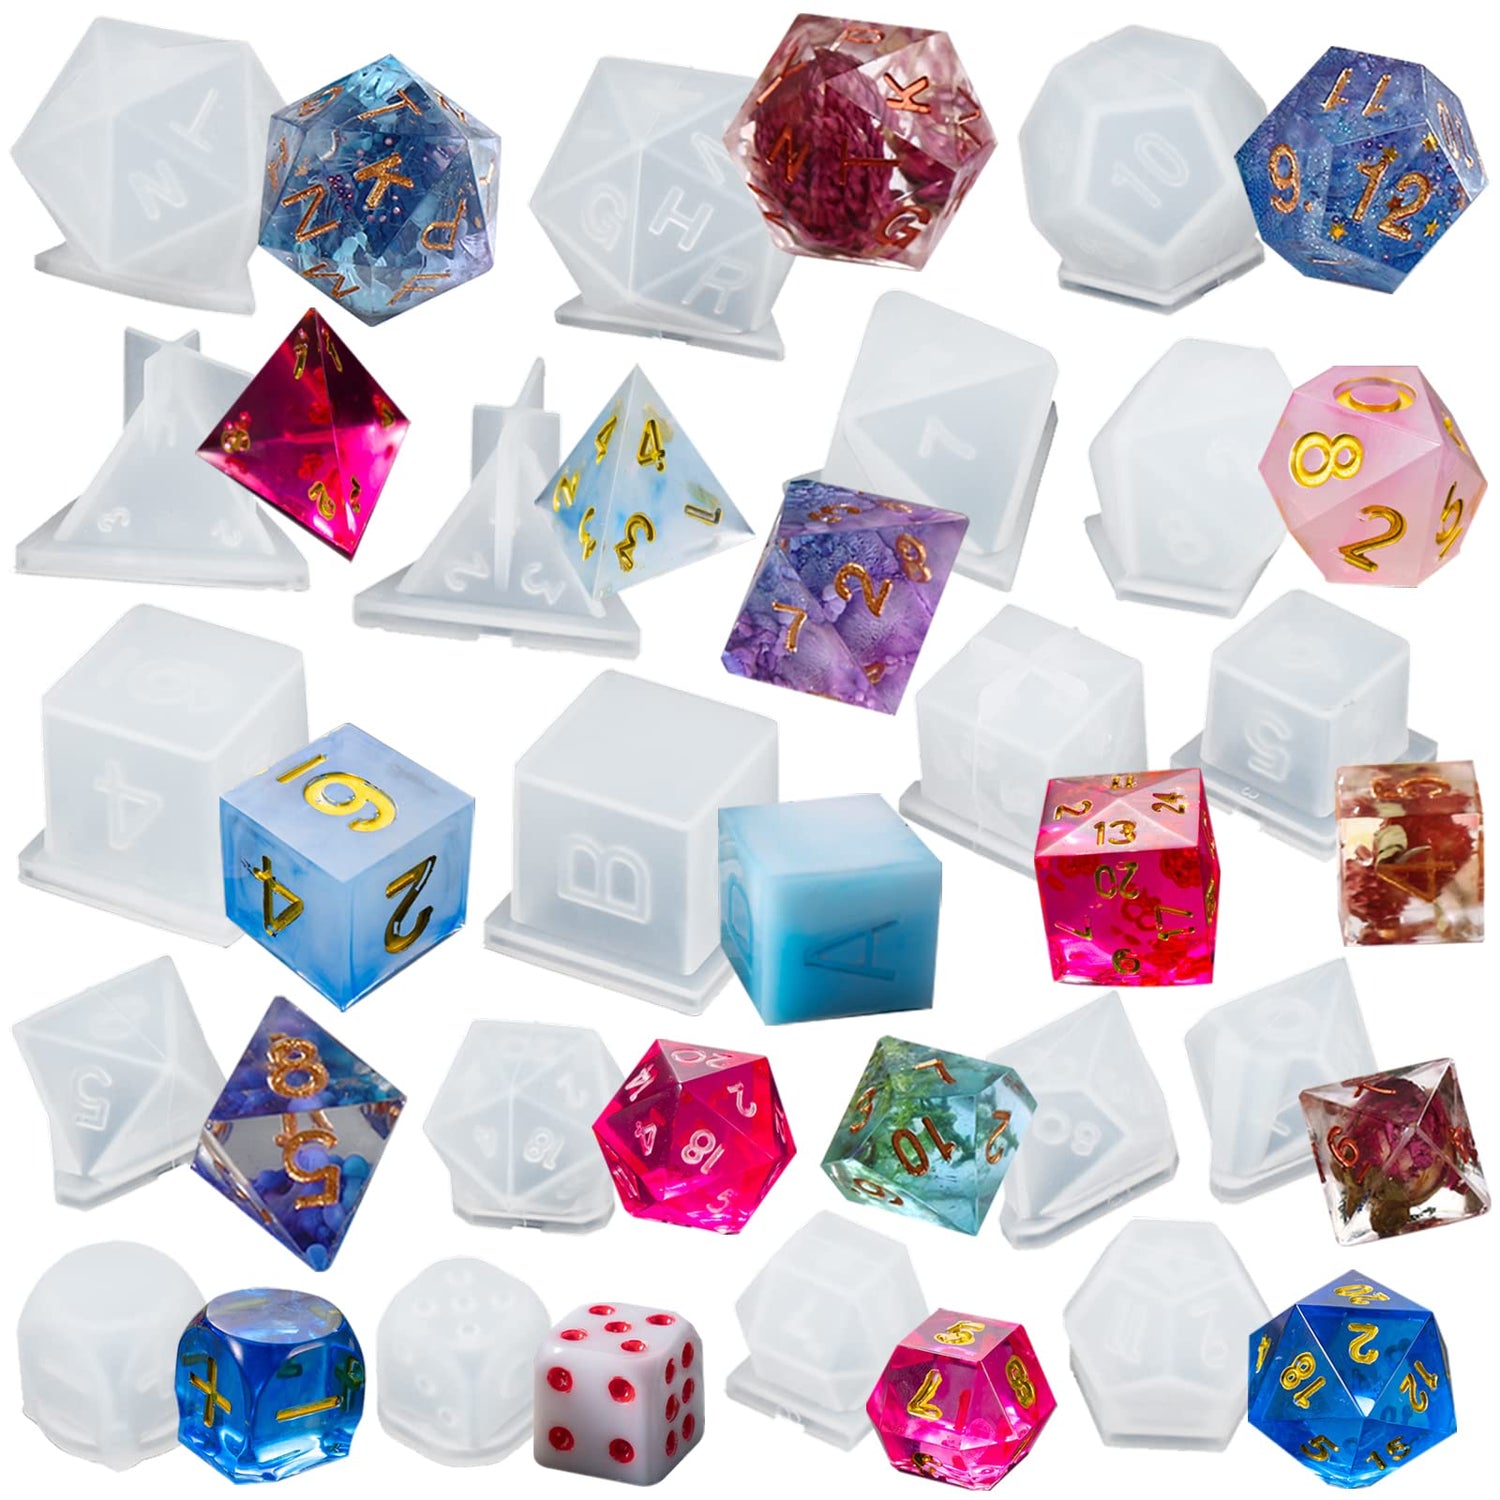 Large Style Dice Silicone Mold DIY 2 Typs Dice Epoxy Resin Mold